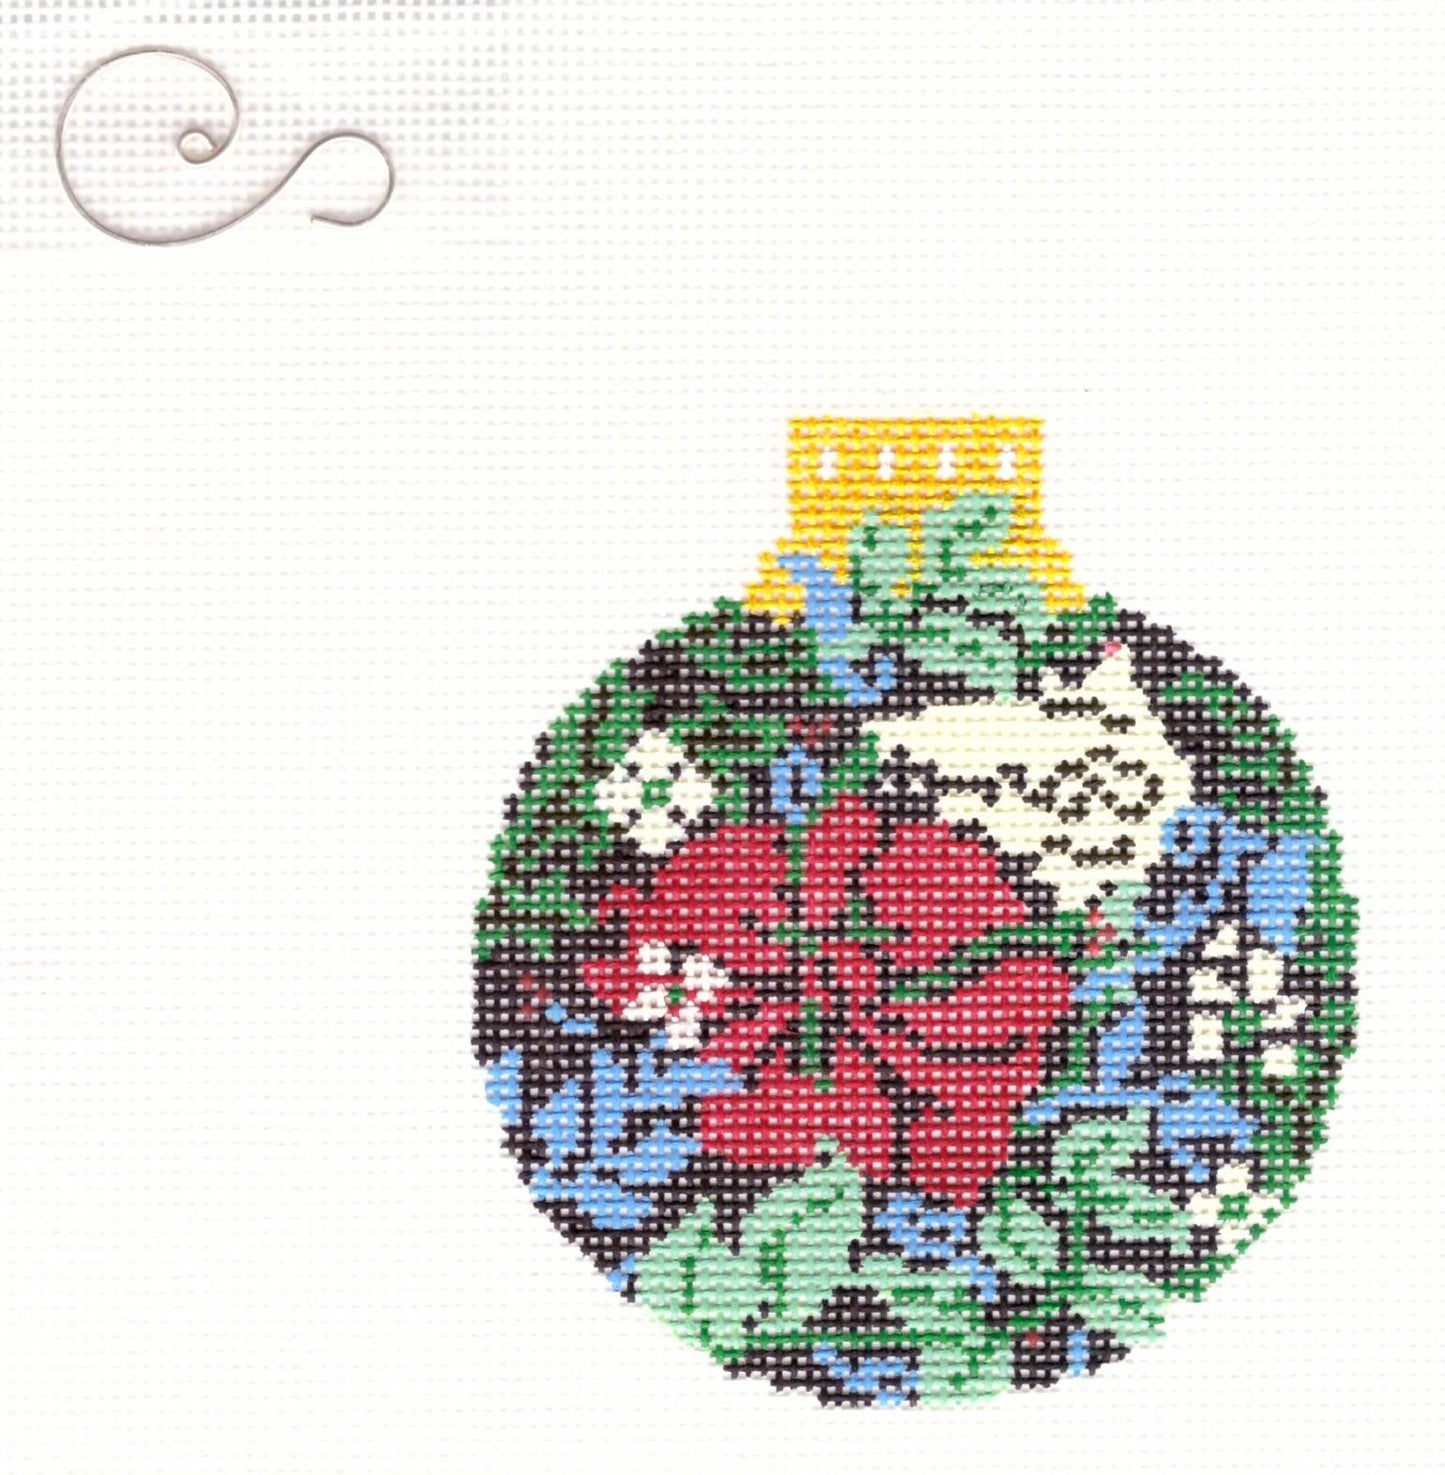 Floral Round ~ Red & White Flowers in a Garden Ornament handpainted 3.25" Needlepoint Canvas by Whimsy and Grace